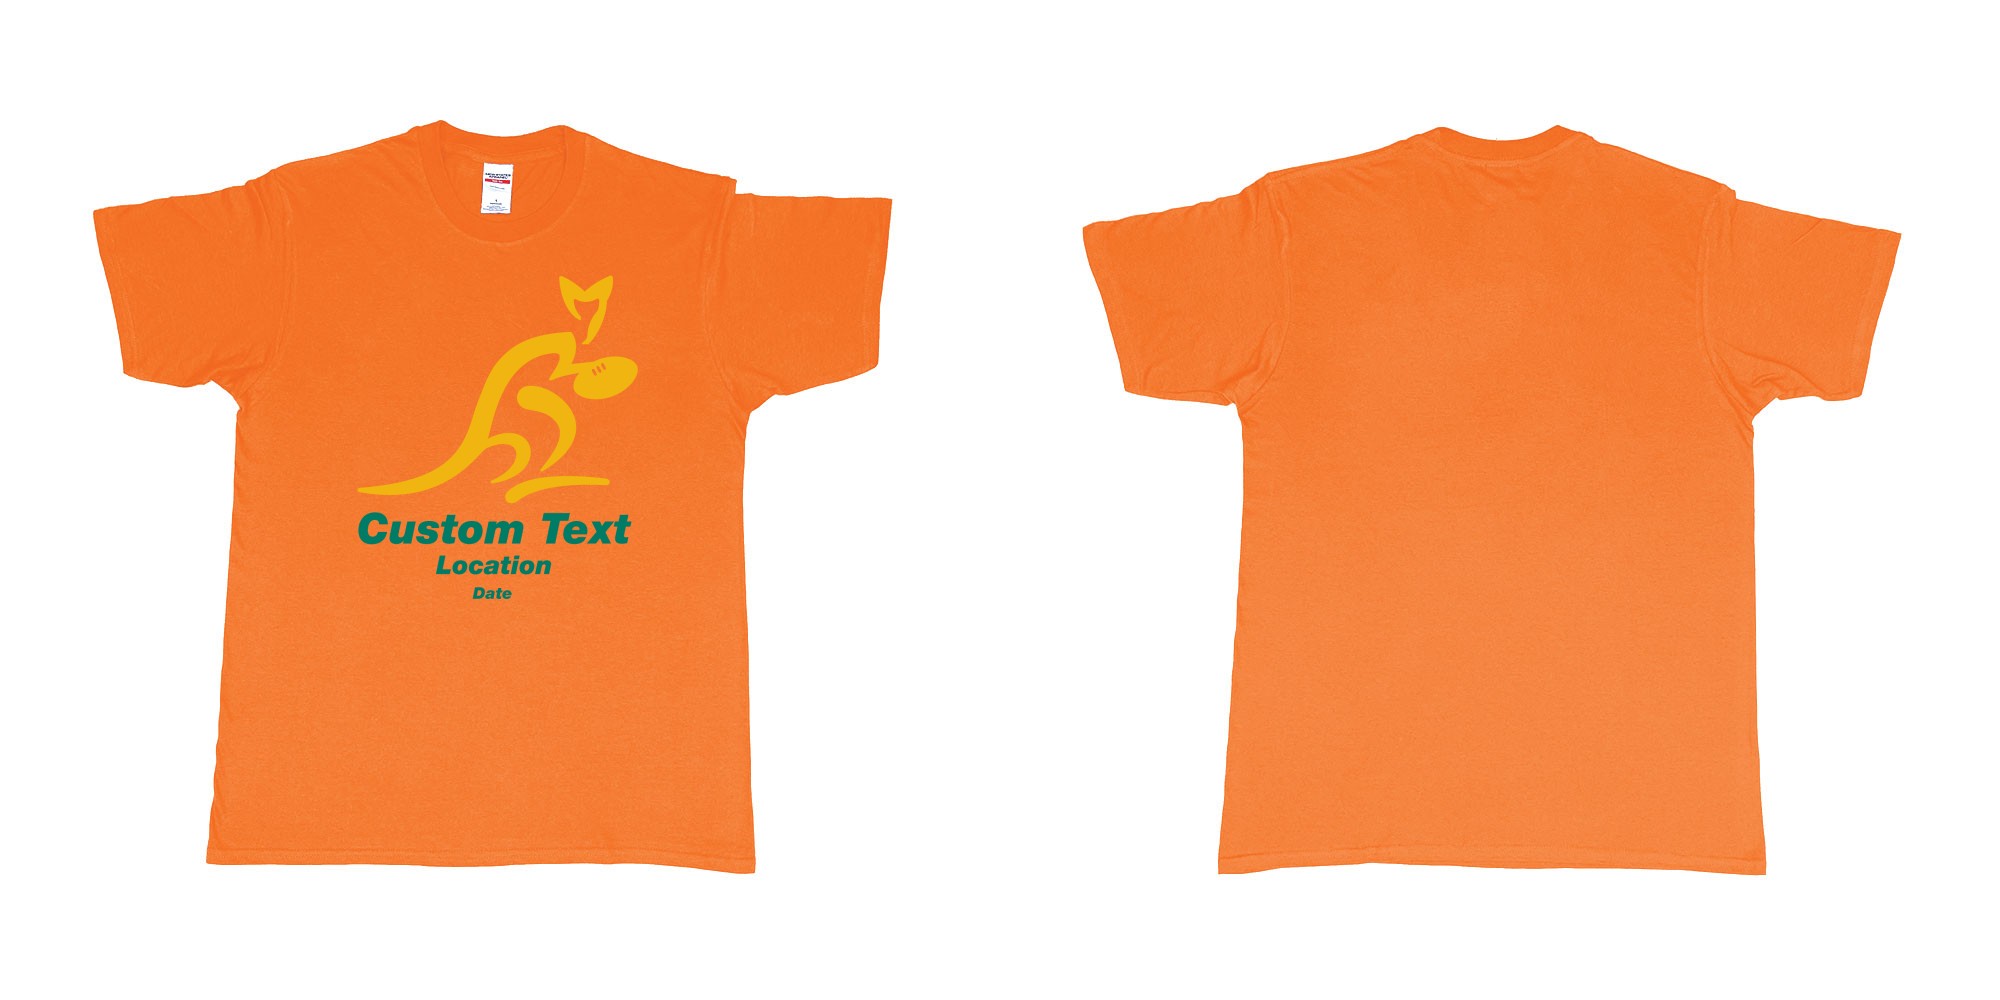 Custom tshirt design australia national rugby union team the wallabies in fabric color orange choice your own text made in Bali by The Pirate Way